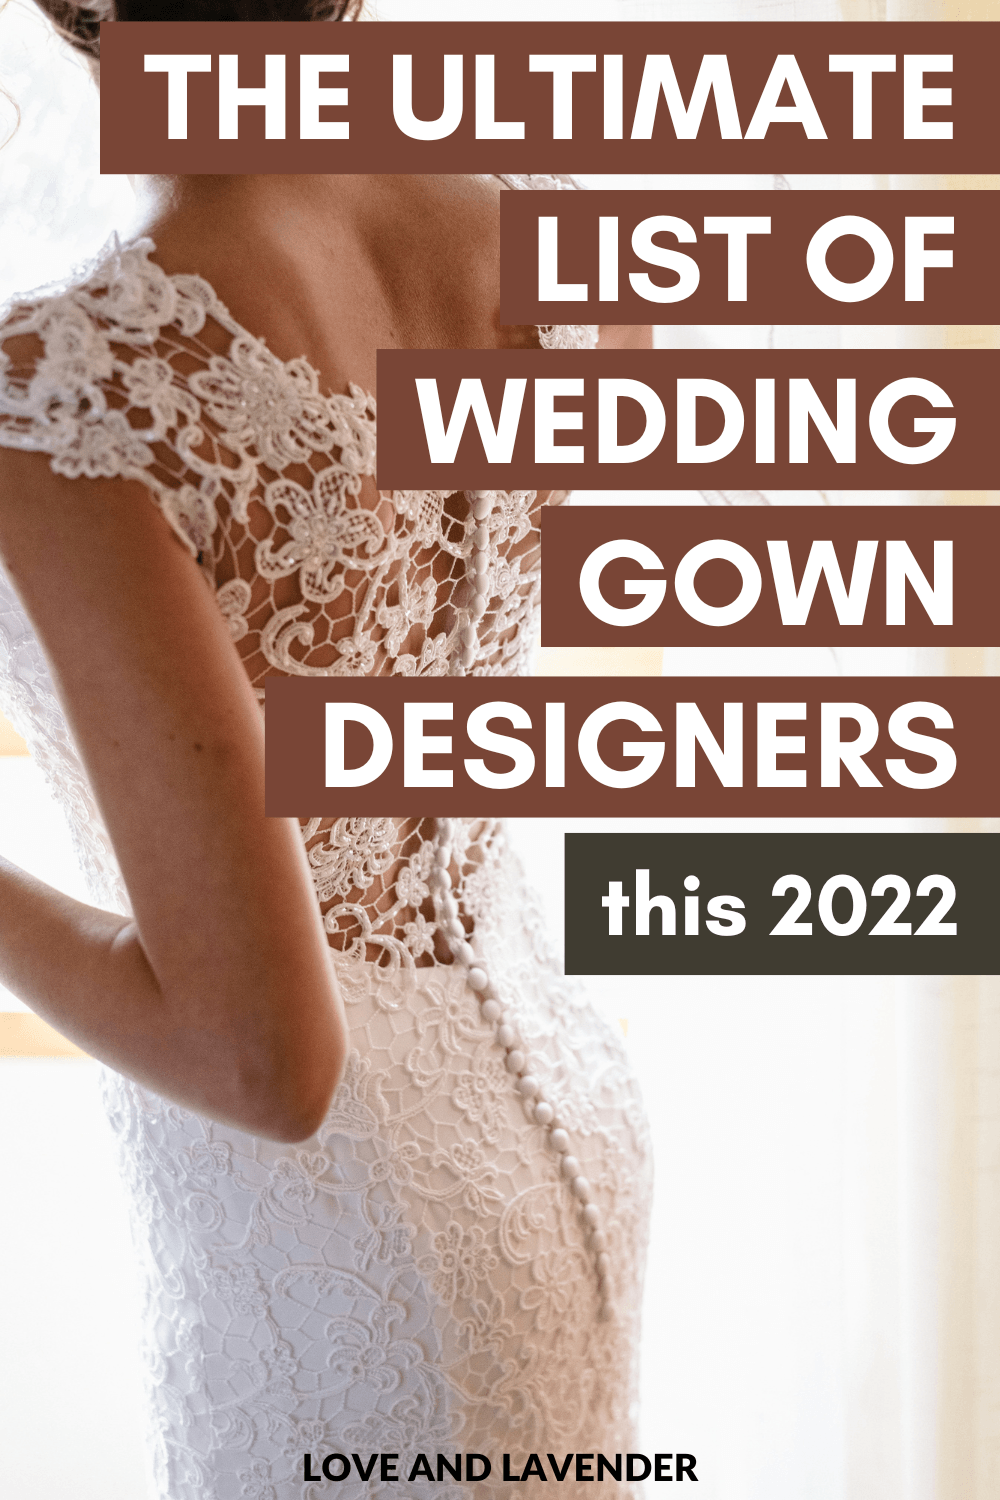 Whether you're looking for a wedding gown designer that specializes in bridal fashion or something more unique, our top favorites are in this list and it features a comprehensive list of some of the most popular wedding gown designers out there.